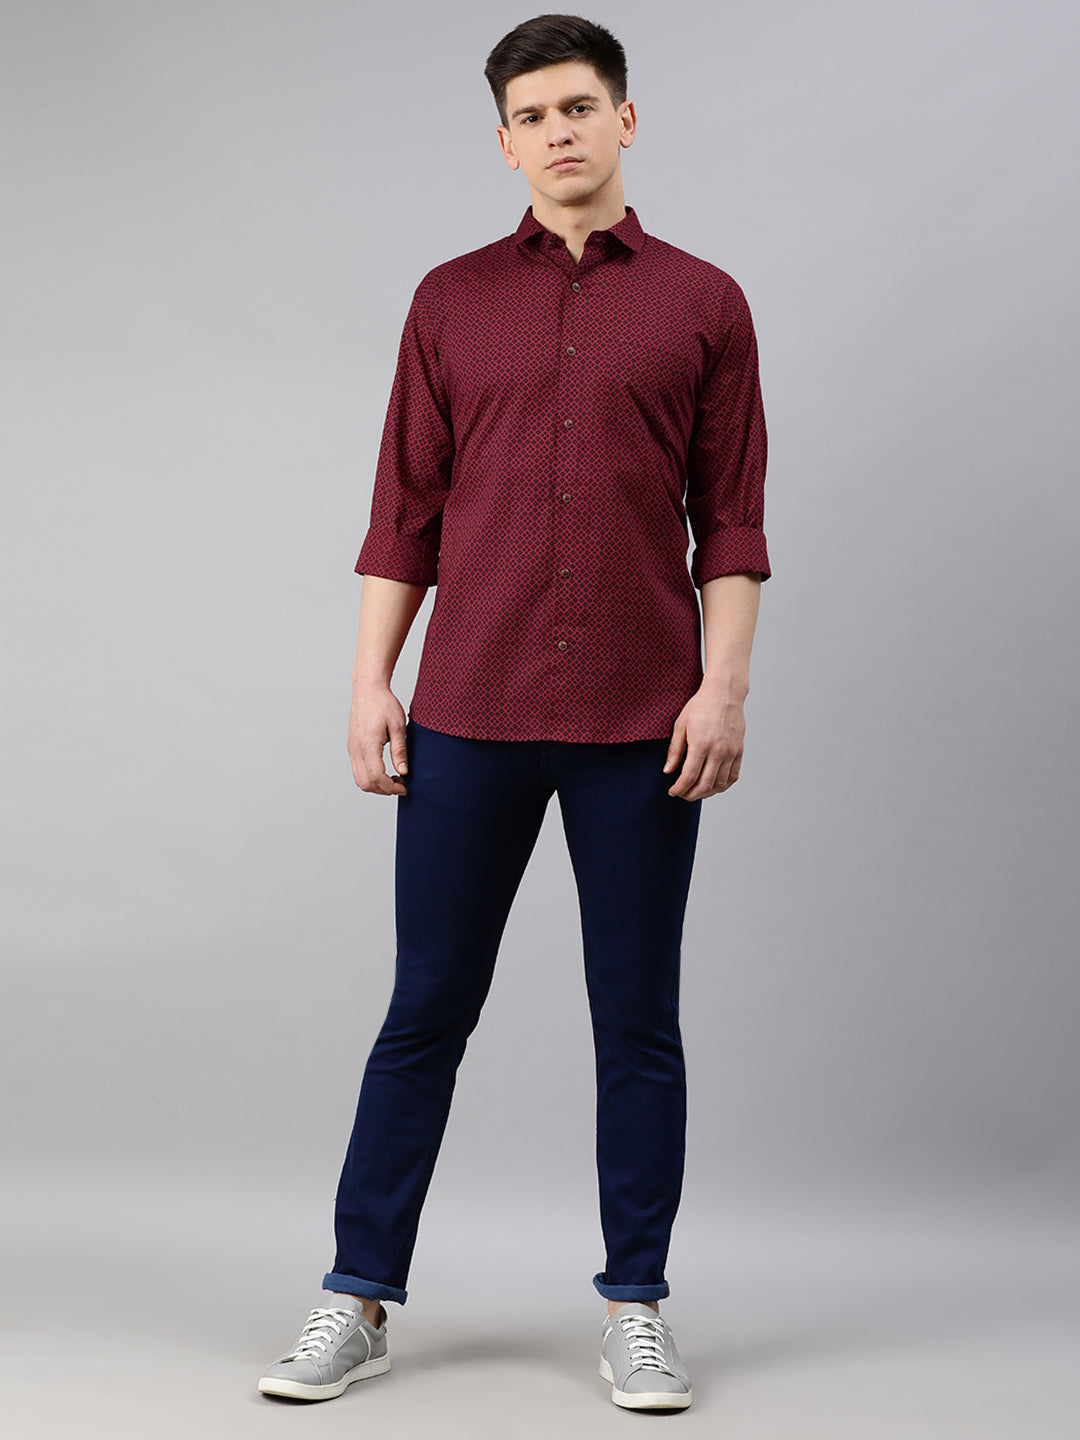 Maroon Cotton Full Sleeves Shirts For Men-MMF028 - NOZ2TOZ